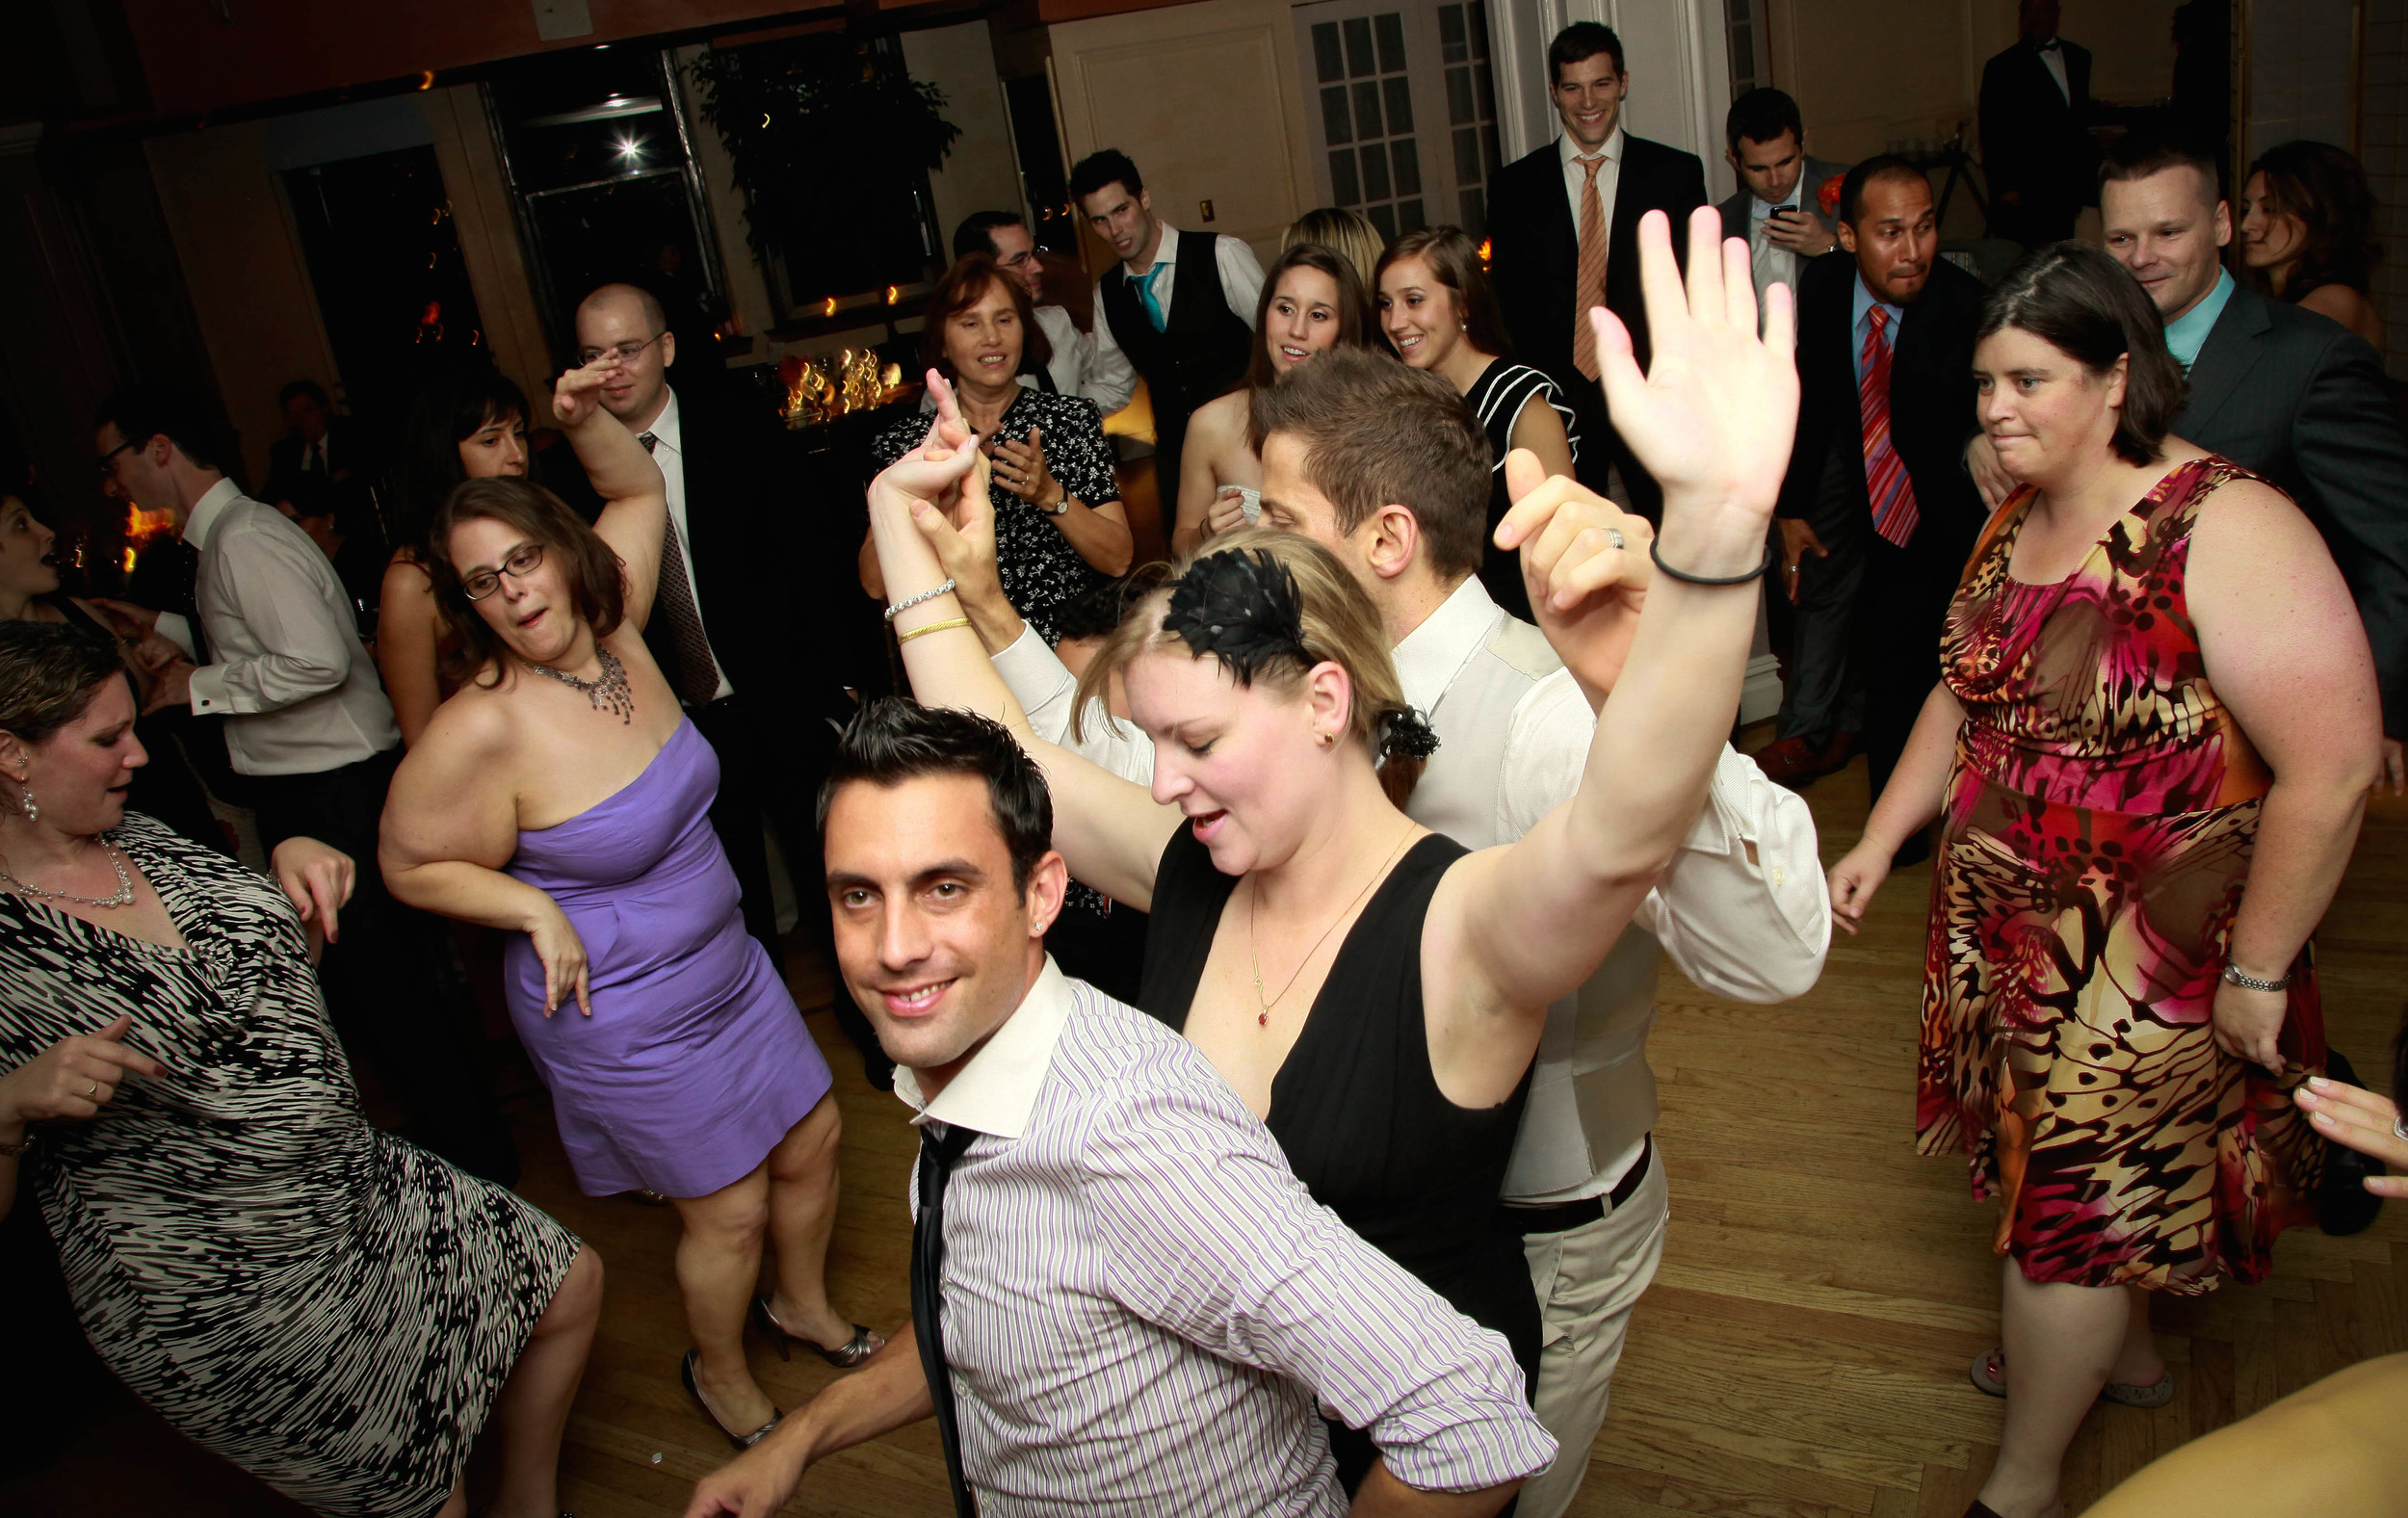  Friends getting down at our wedding. 